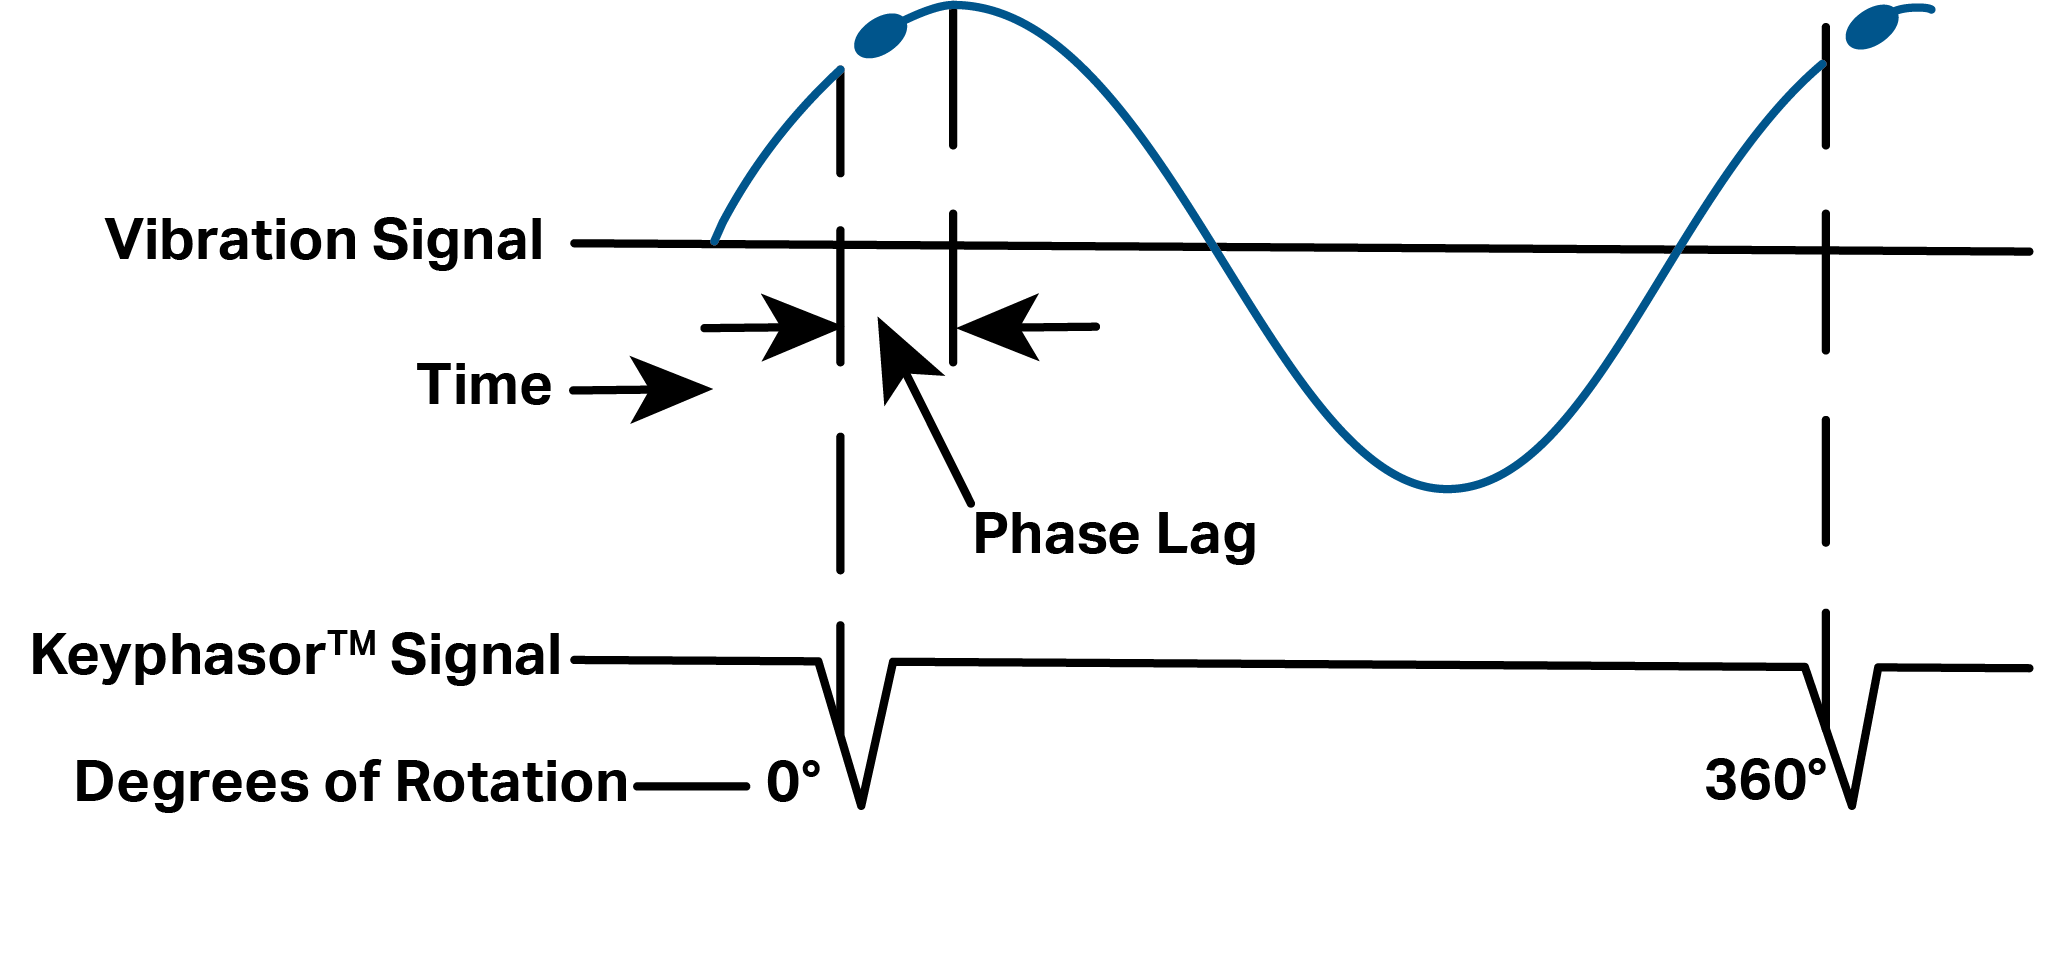 A diagram showing Keyphasor™ signal and vibration signal